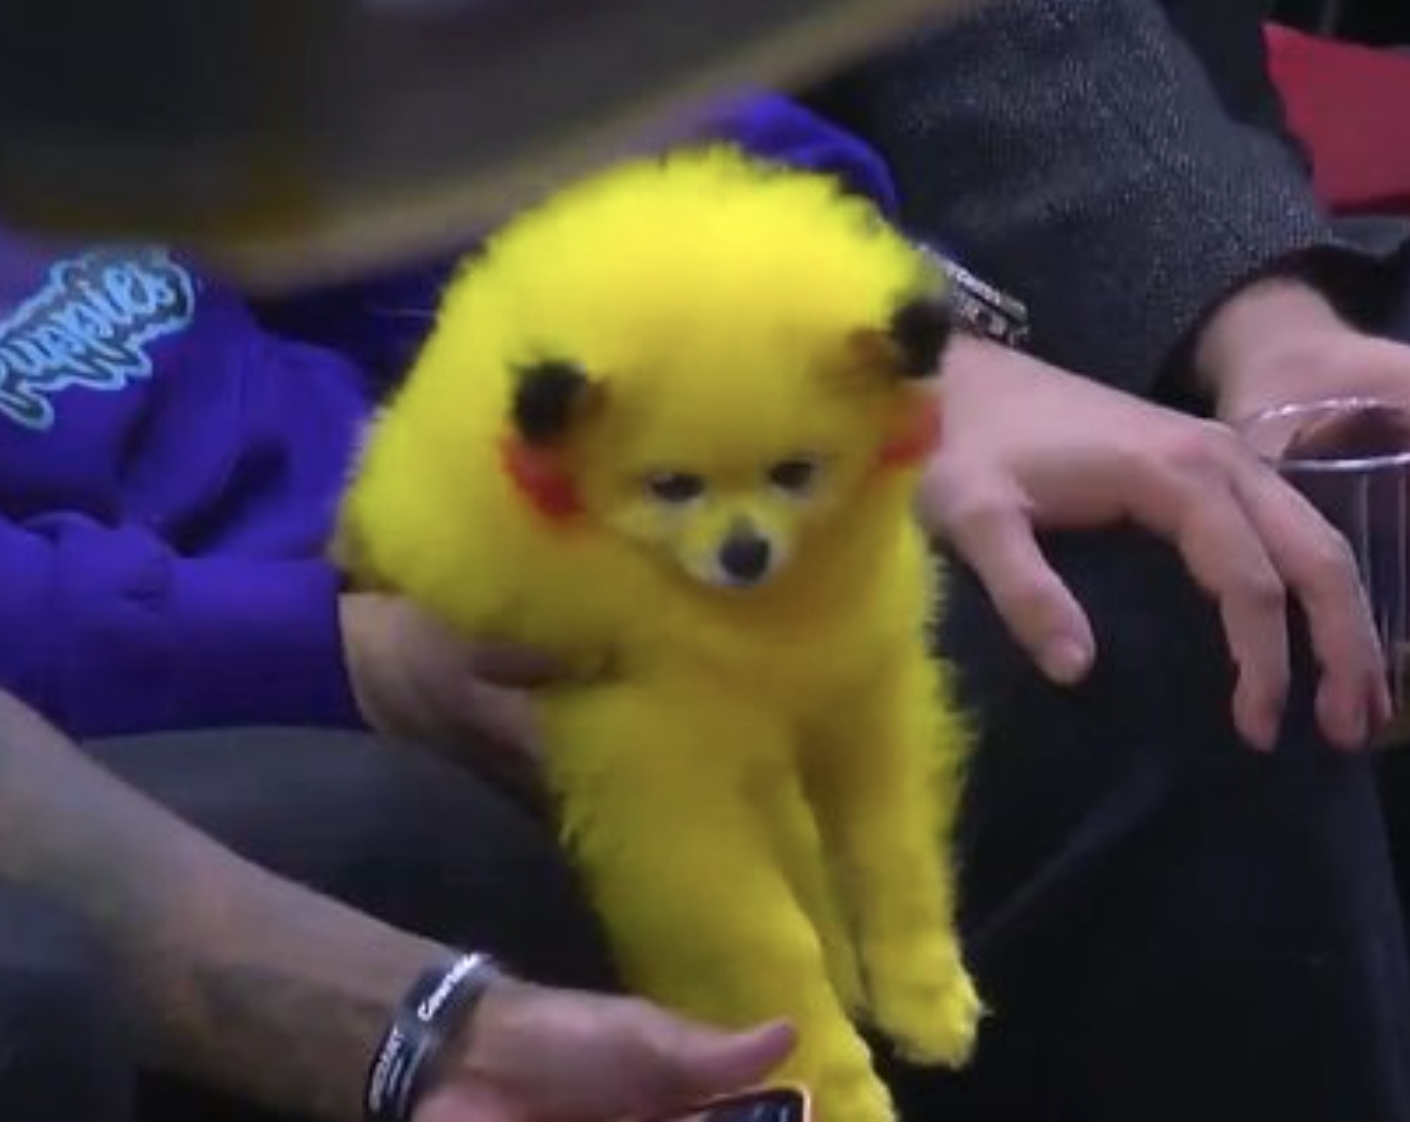 a dog with its fur died to look like the Pokémon character “Pikachu”